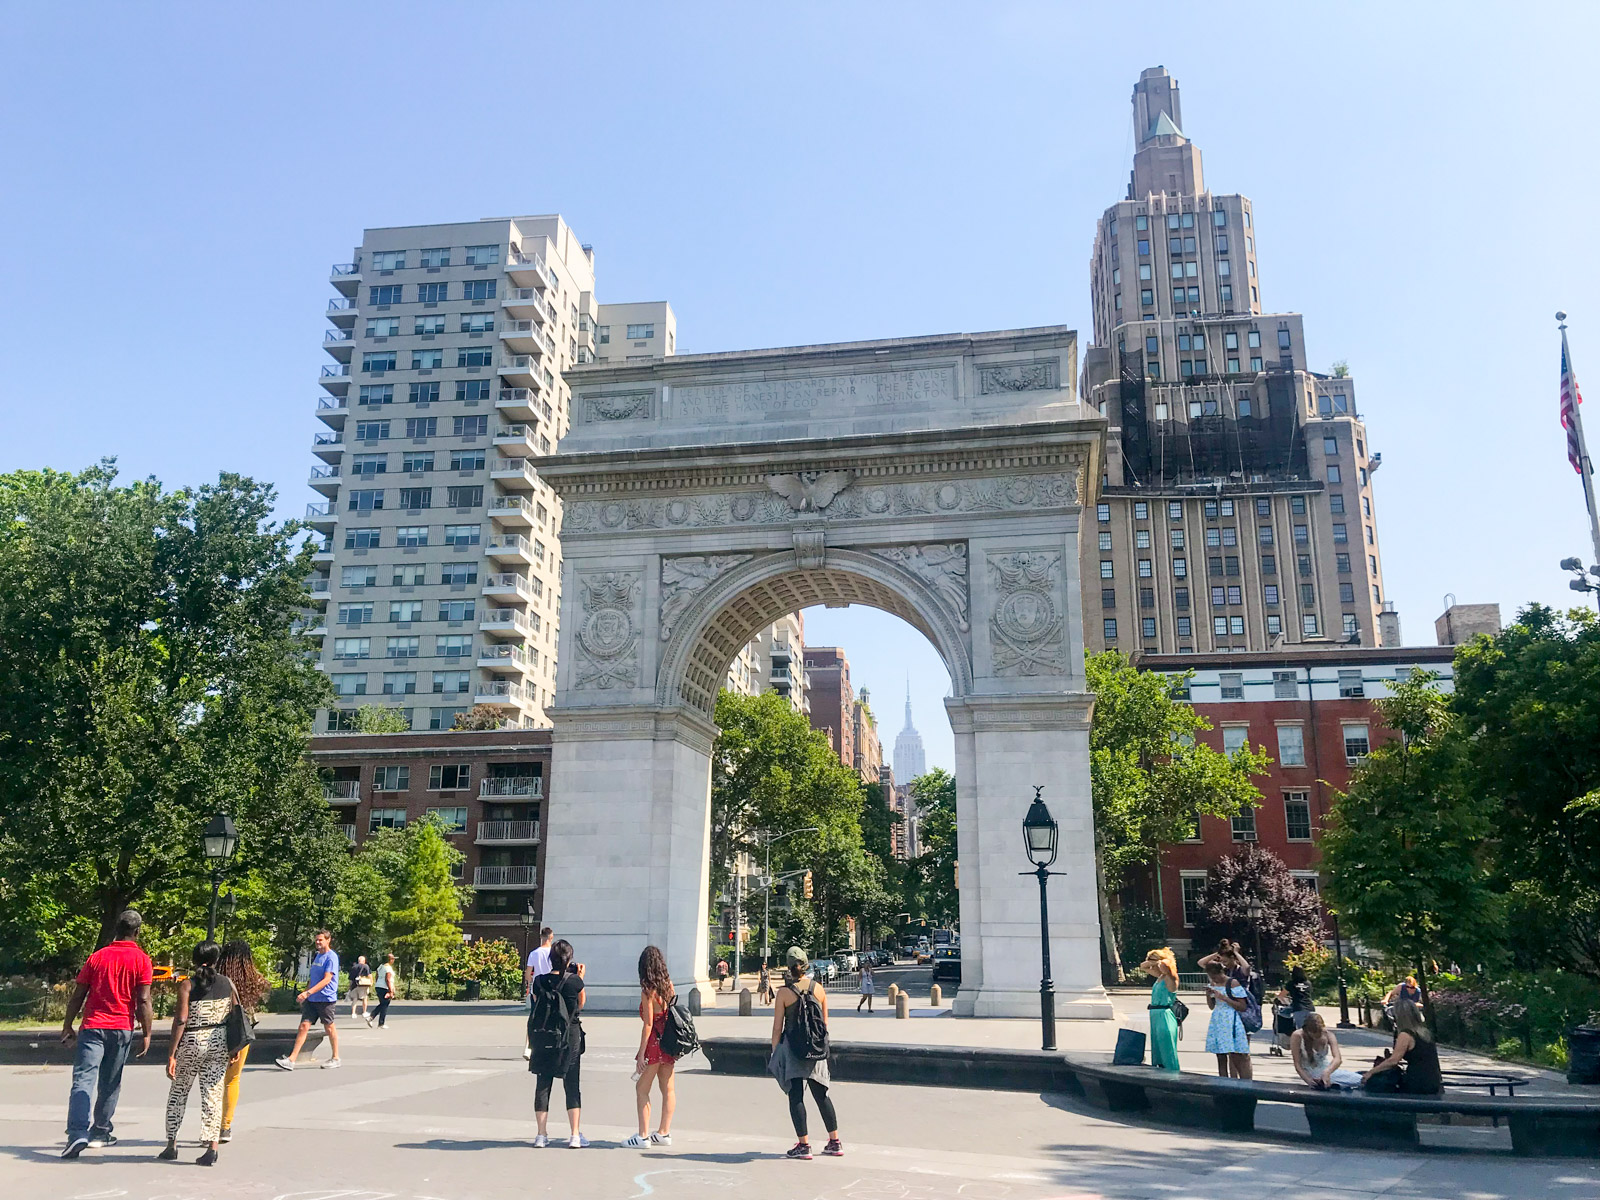 The Washington Square Park arch during the daytime. In the distance, the tall Empire State building can be seen through the arch.